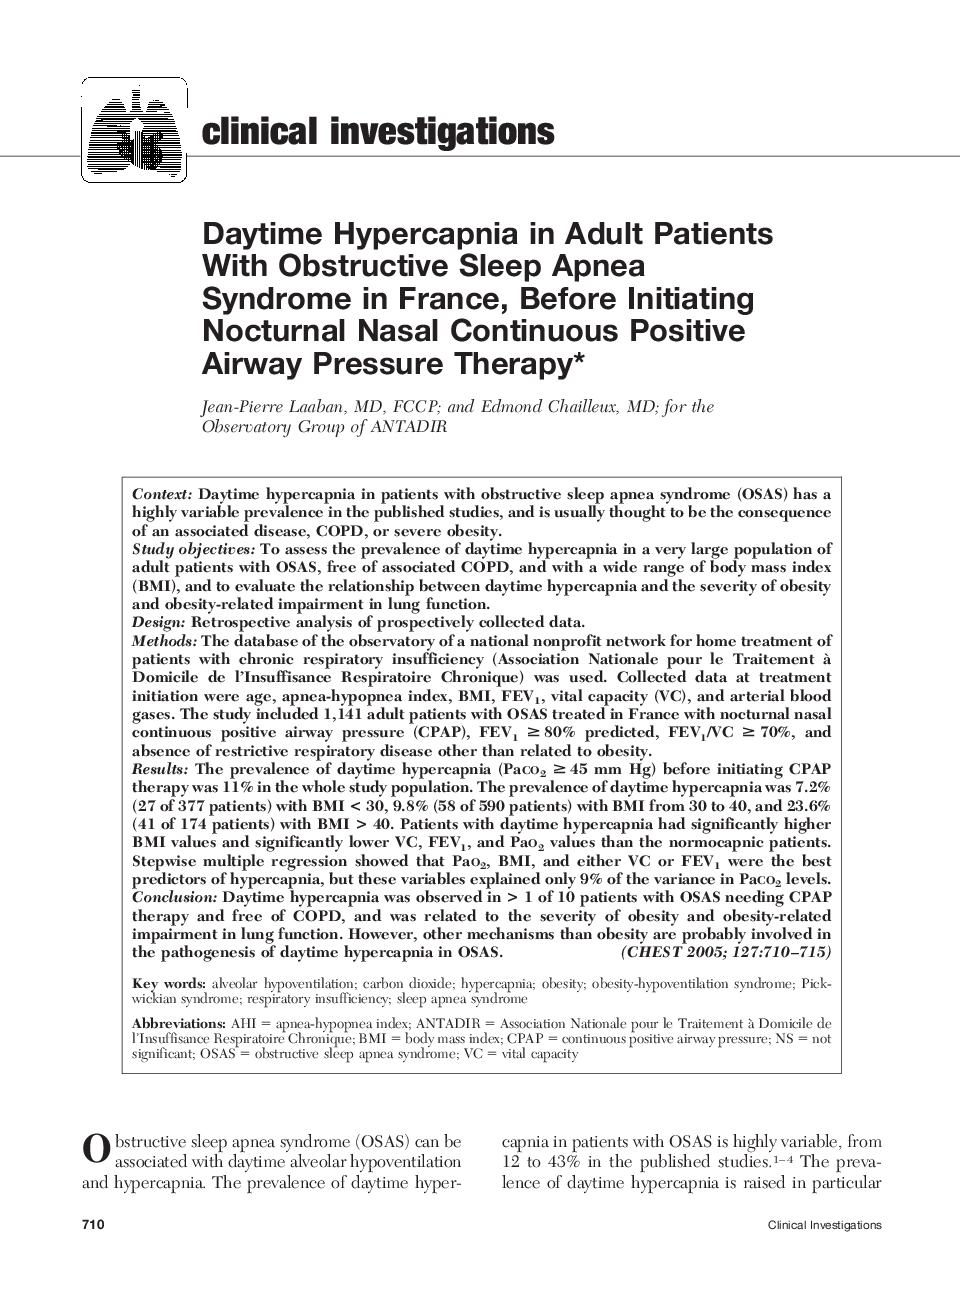 Daytime Hypercapnia in Adult Patients With Obstructive Sleep Apnea Syndrome in France, Before Initiating Nocturnal Nasal Continuous Positive Airway Pressure Therapy